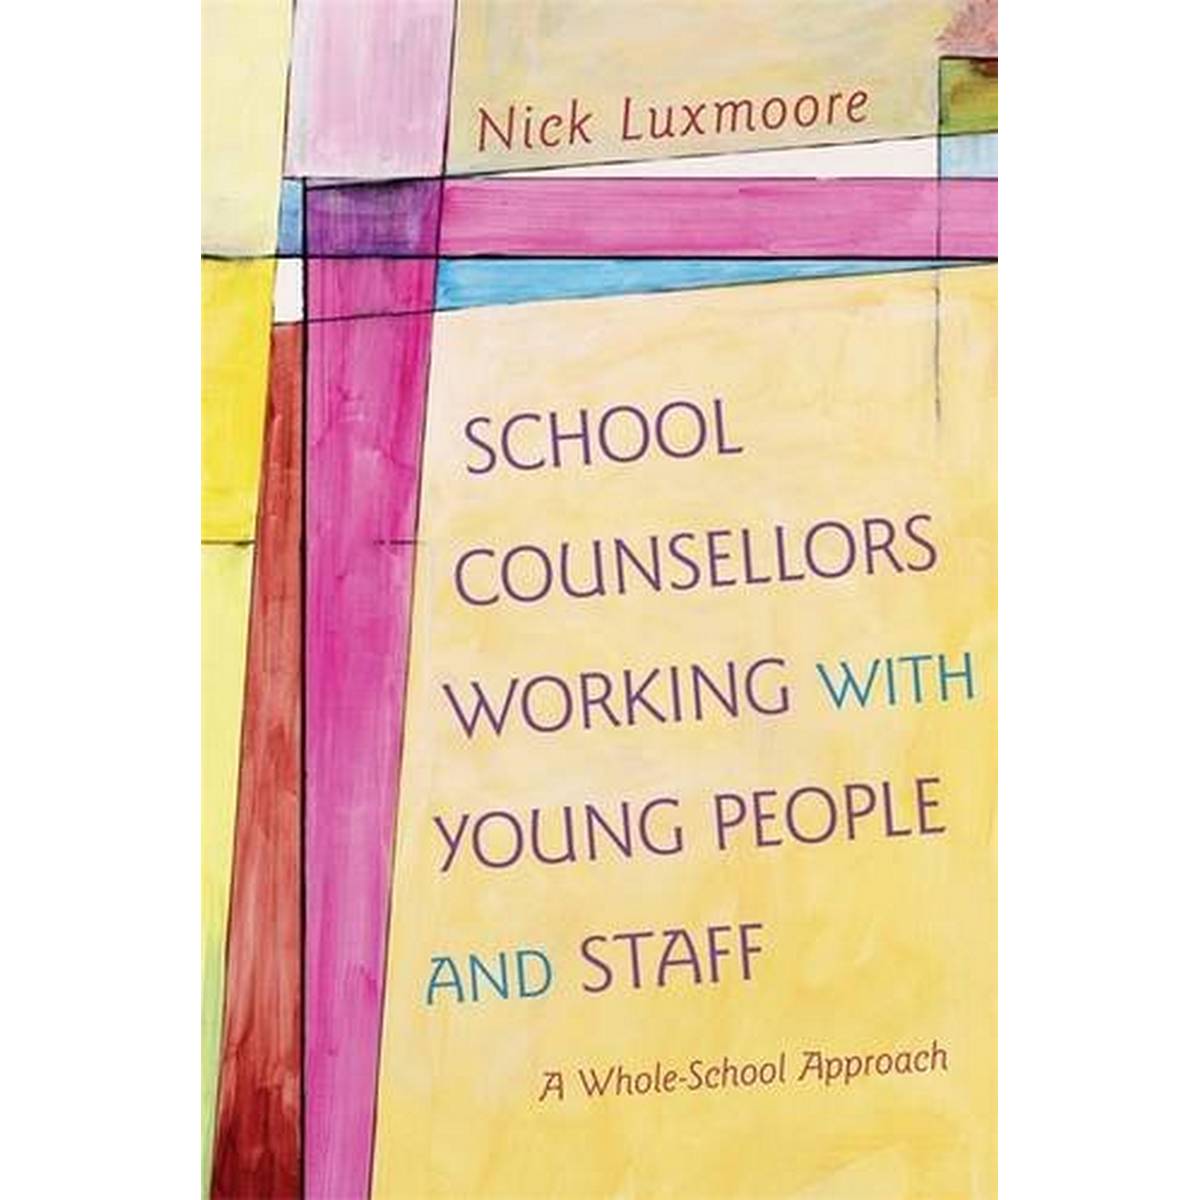 School Counsellors Working with Young People and Staff: A Whole-School Approach